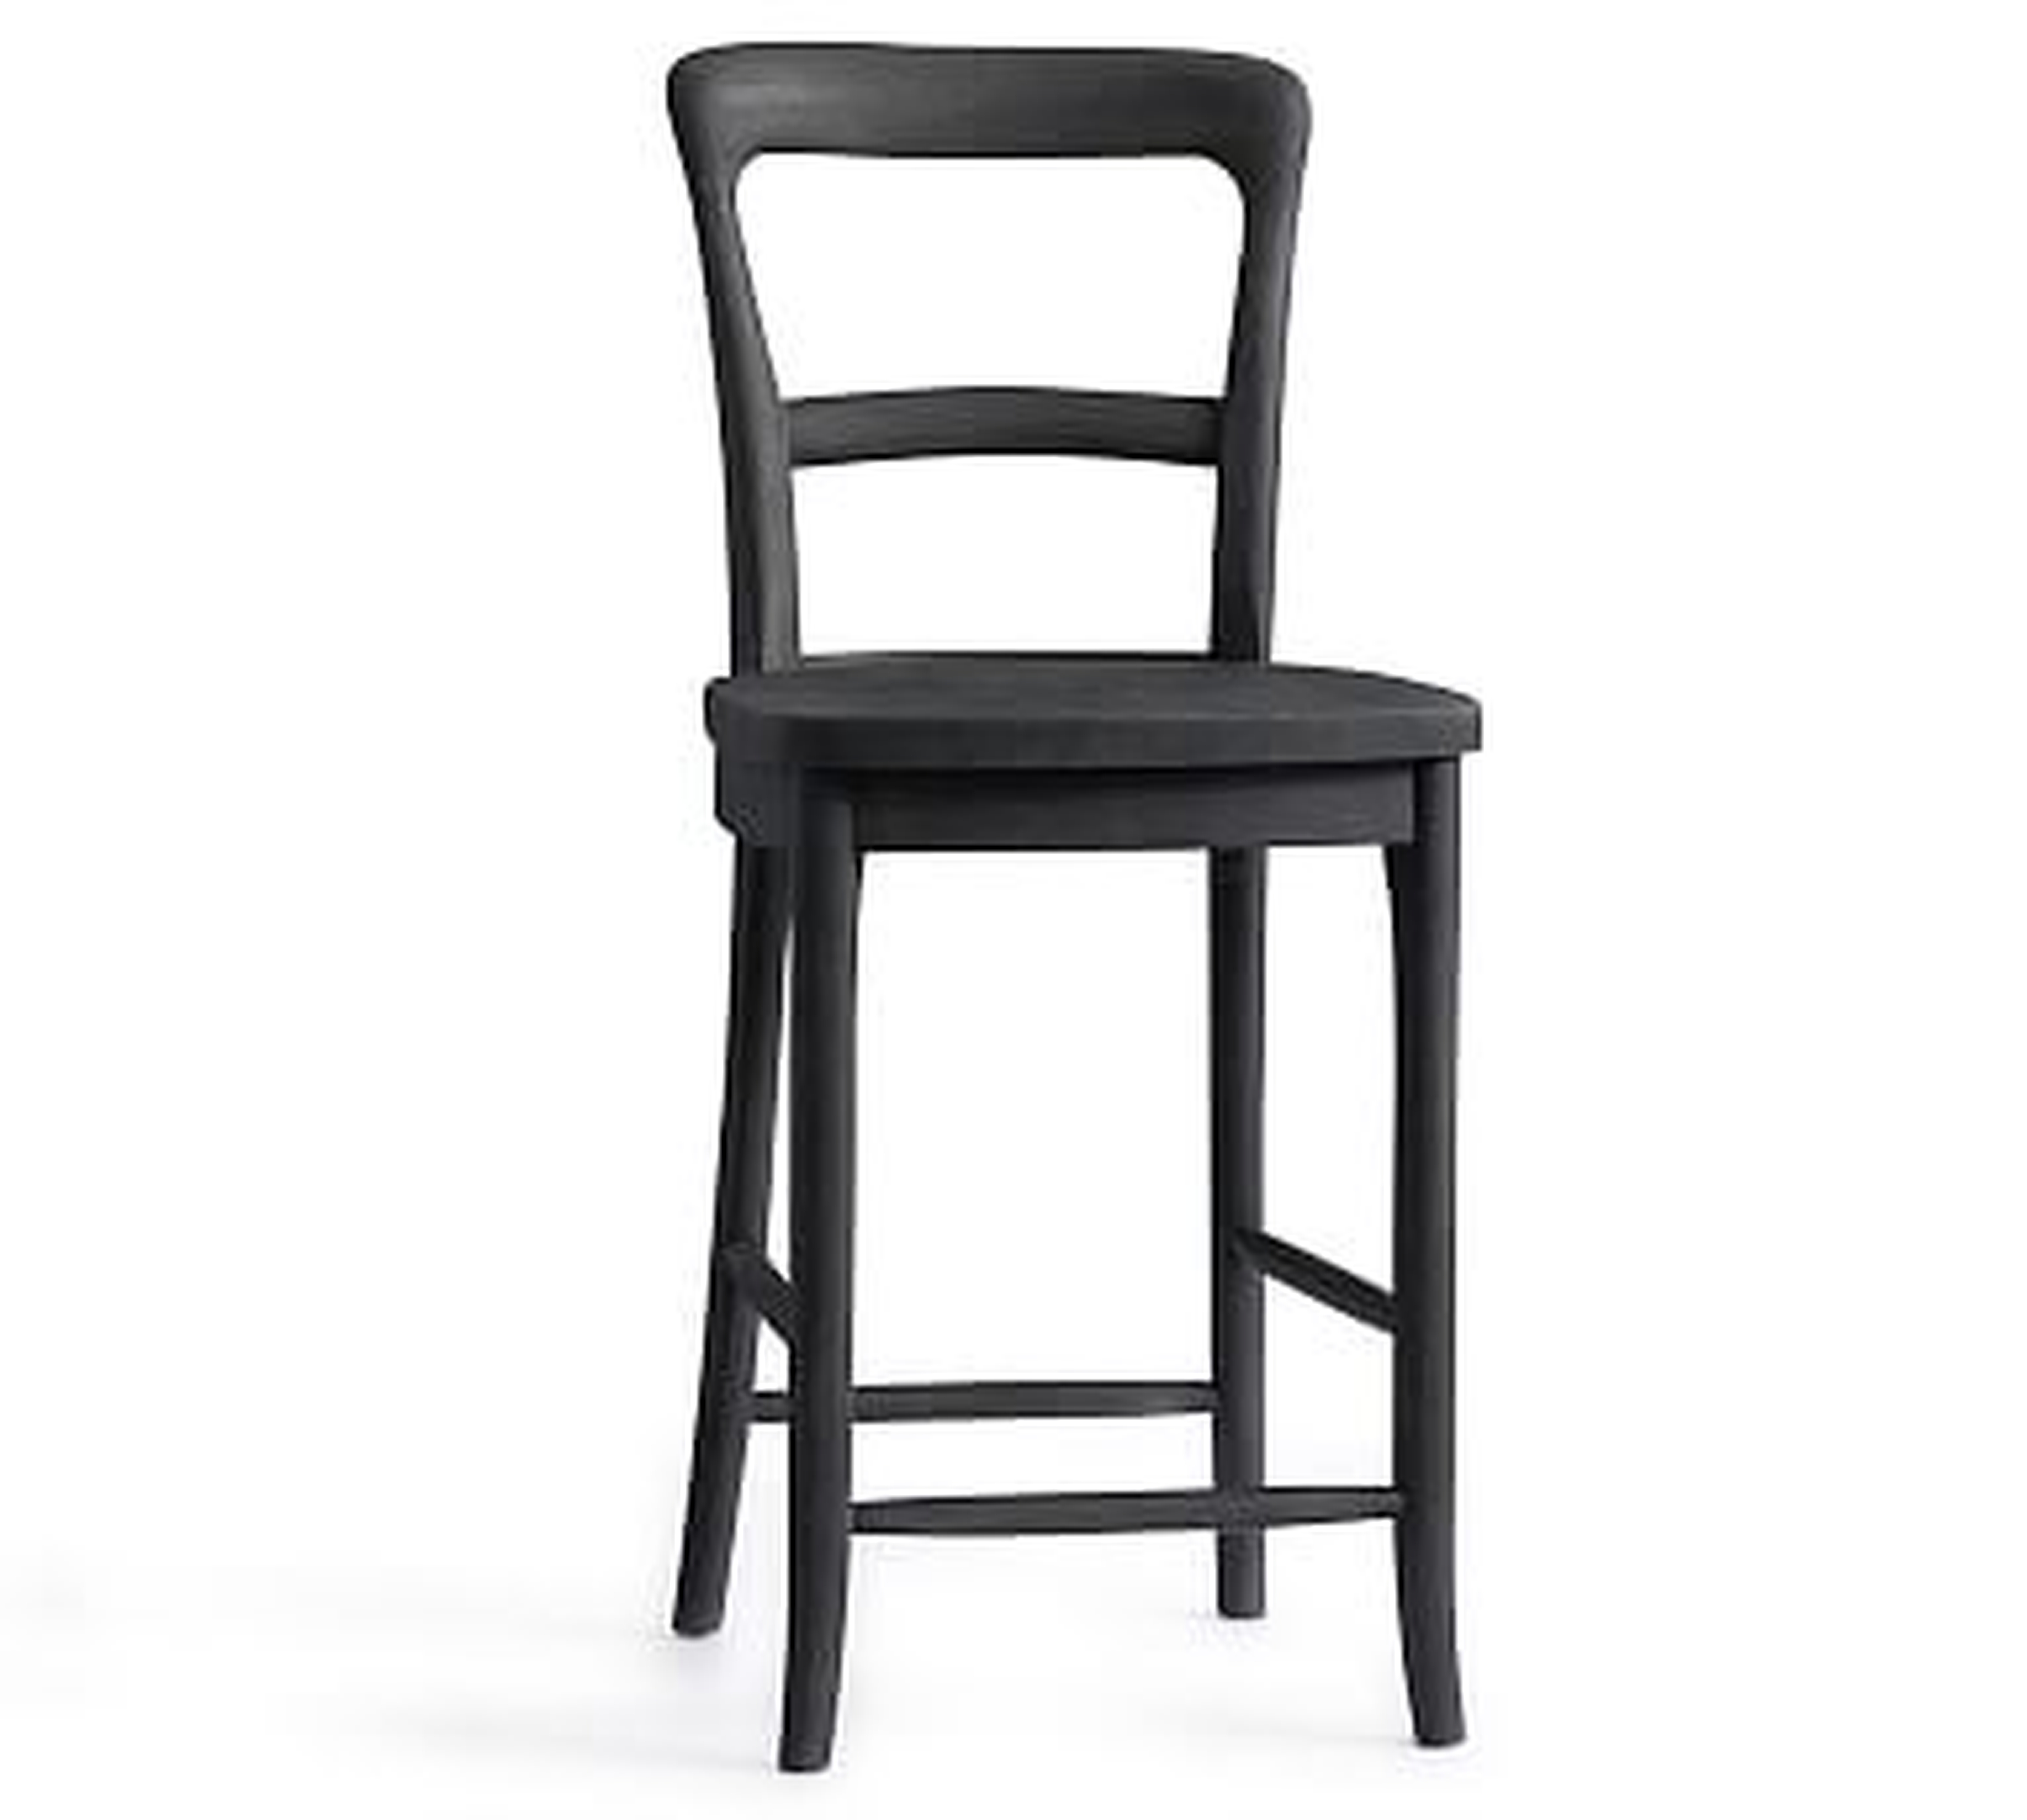 Cline Counter Stool, Charcoal - Pottery Barn